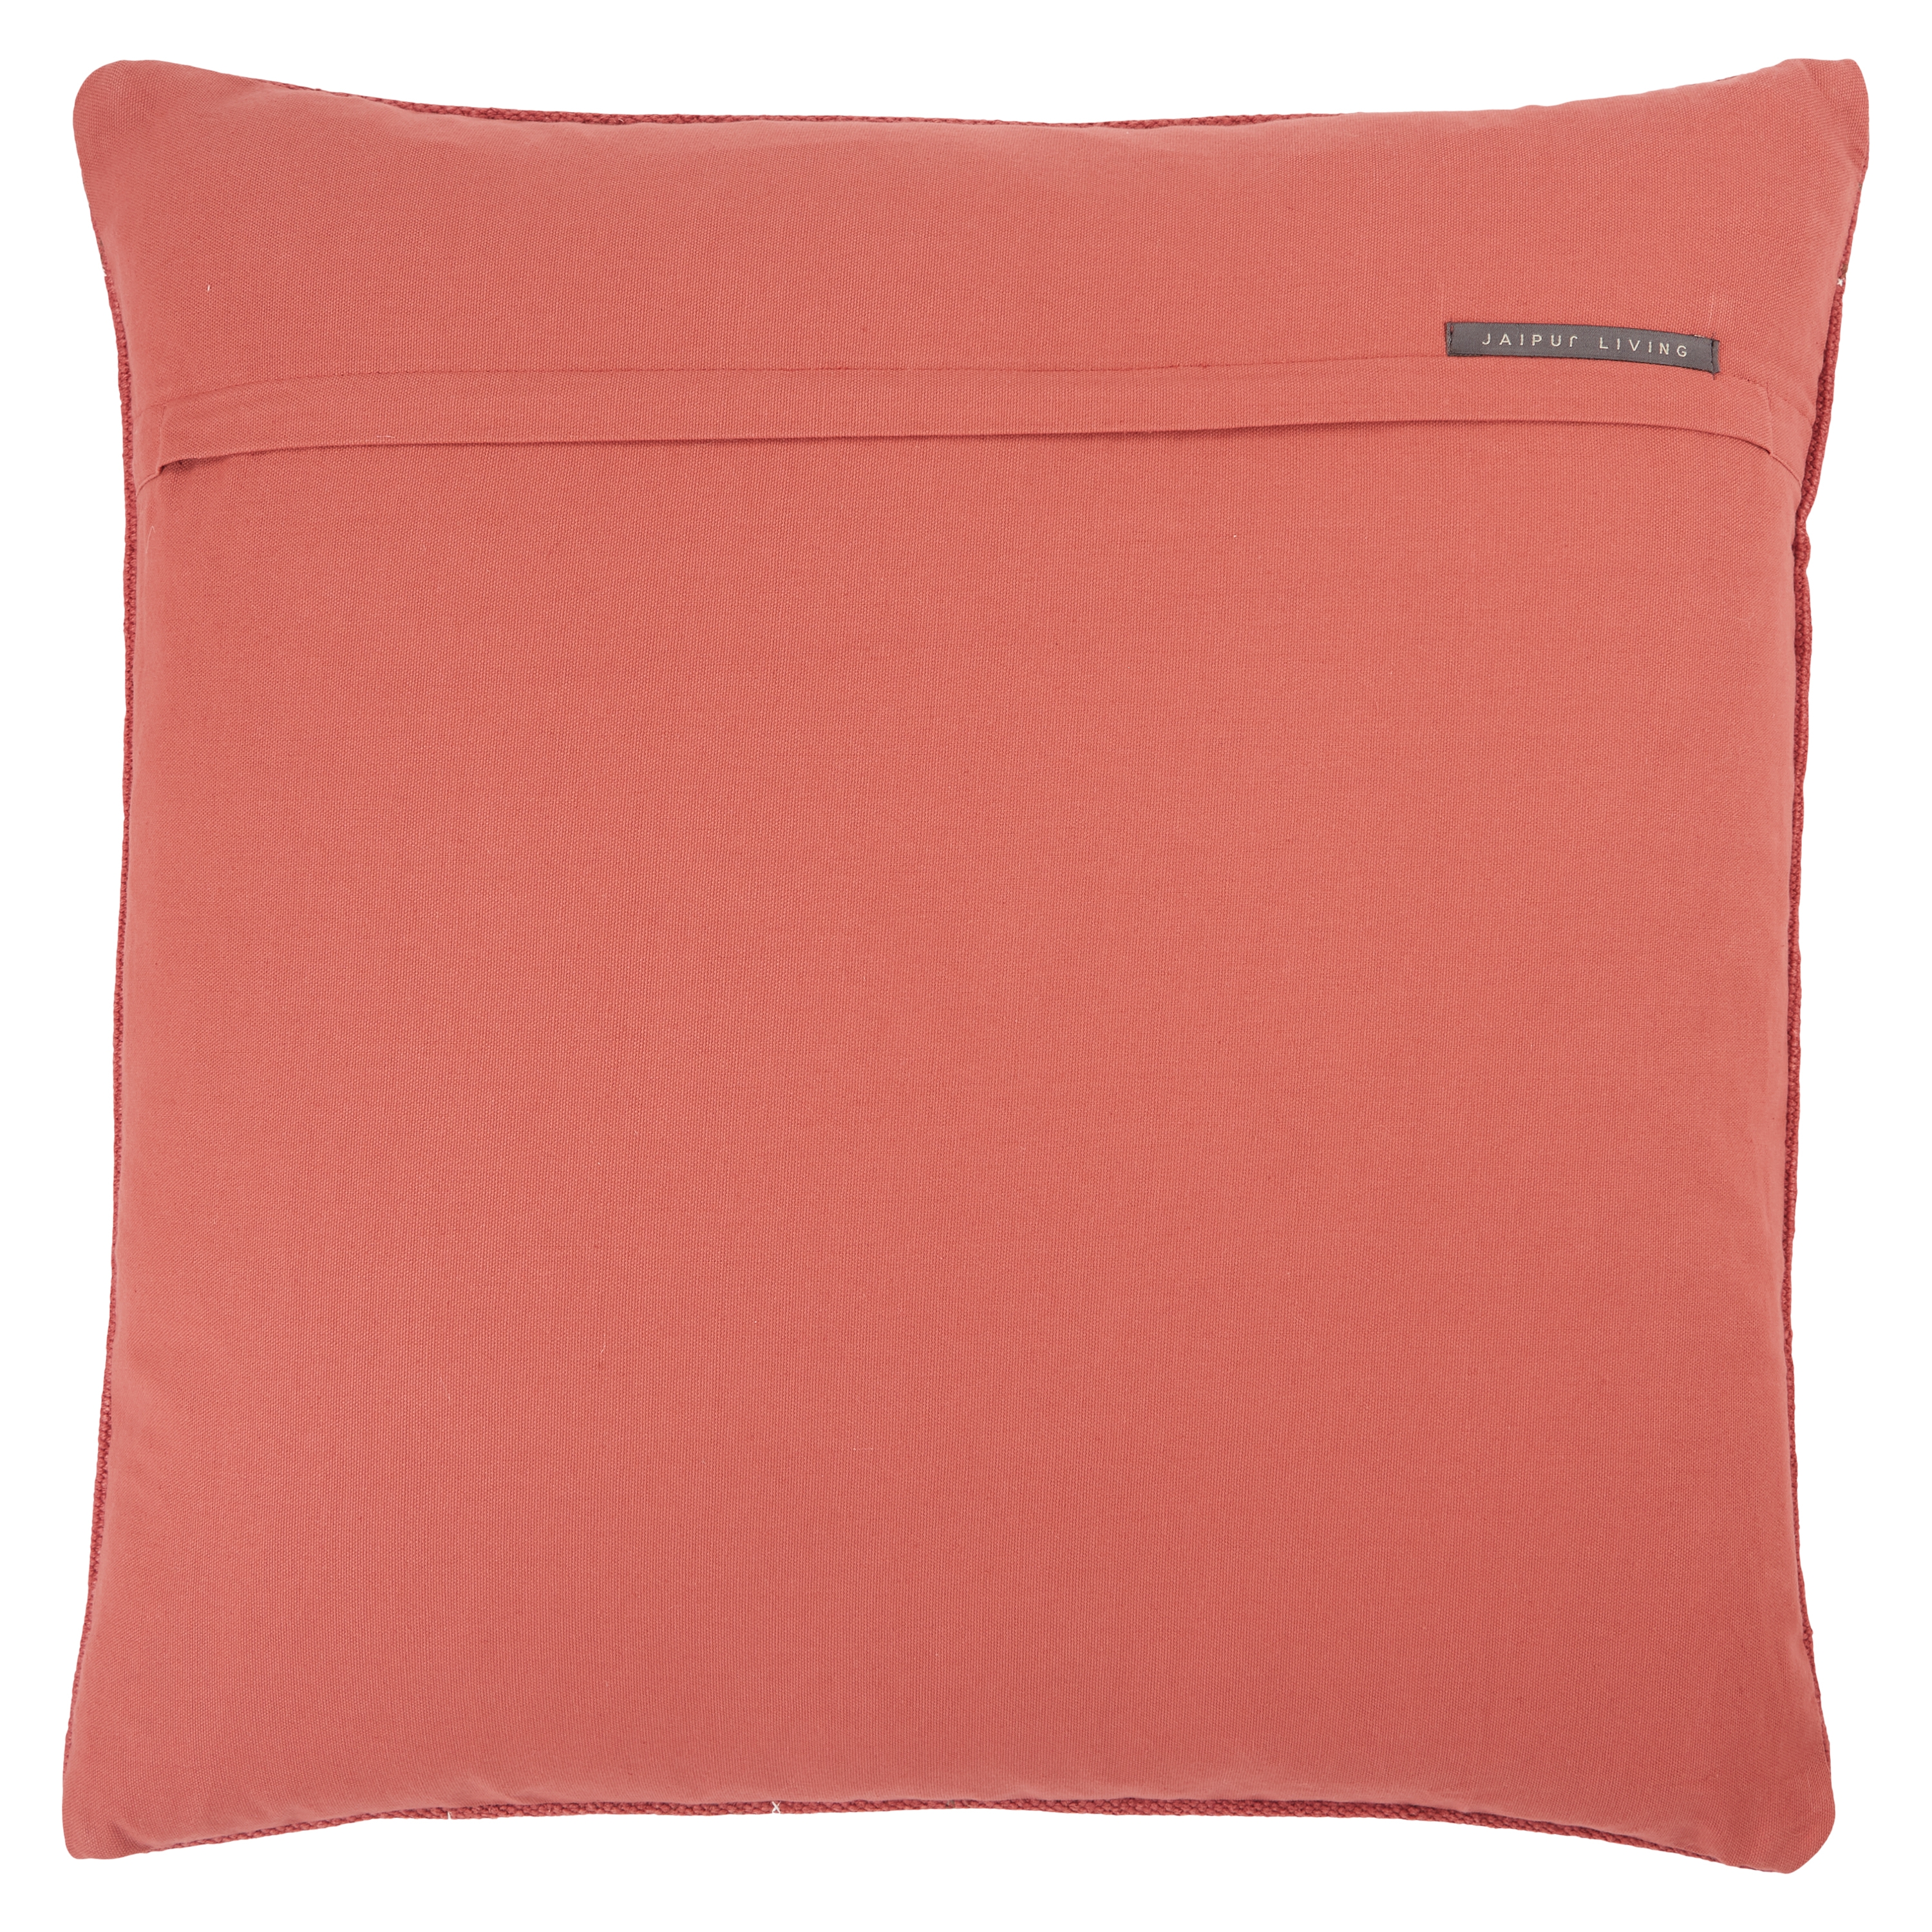 Design (US) Red 24"X24" Pillow - Image 1